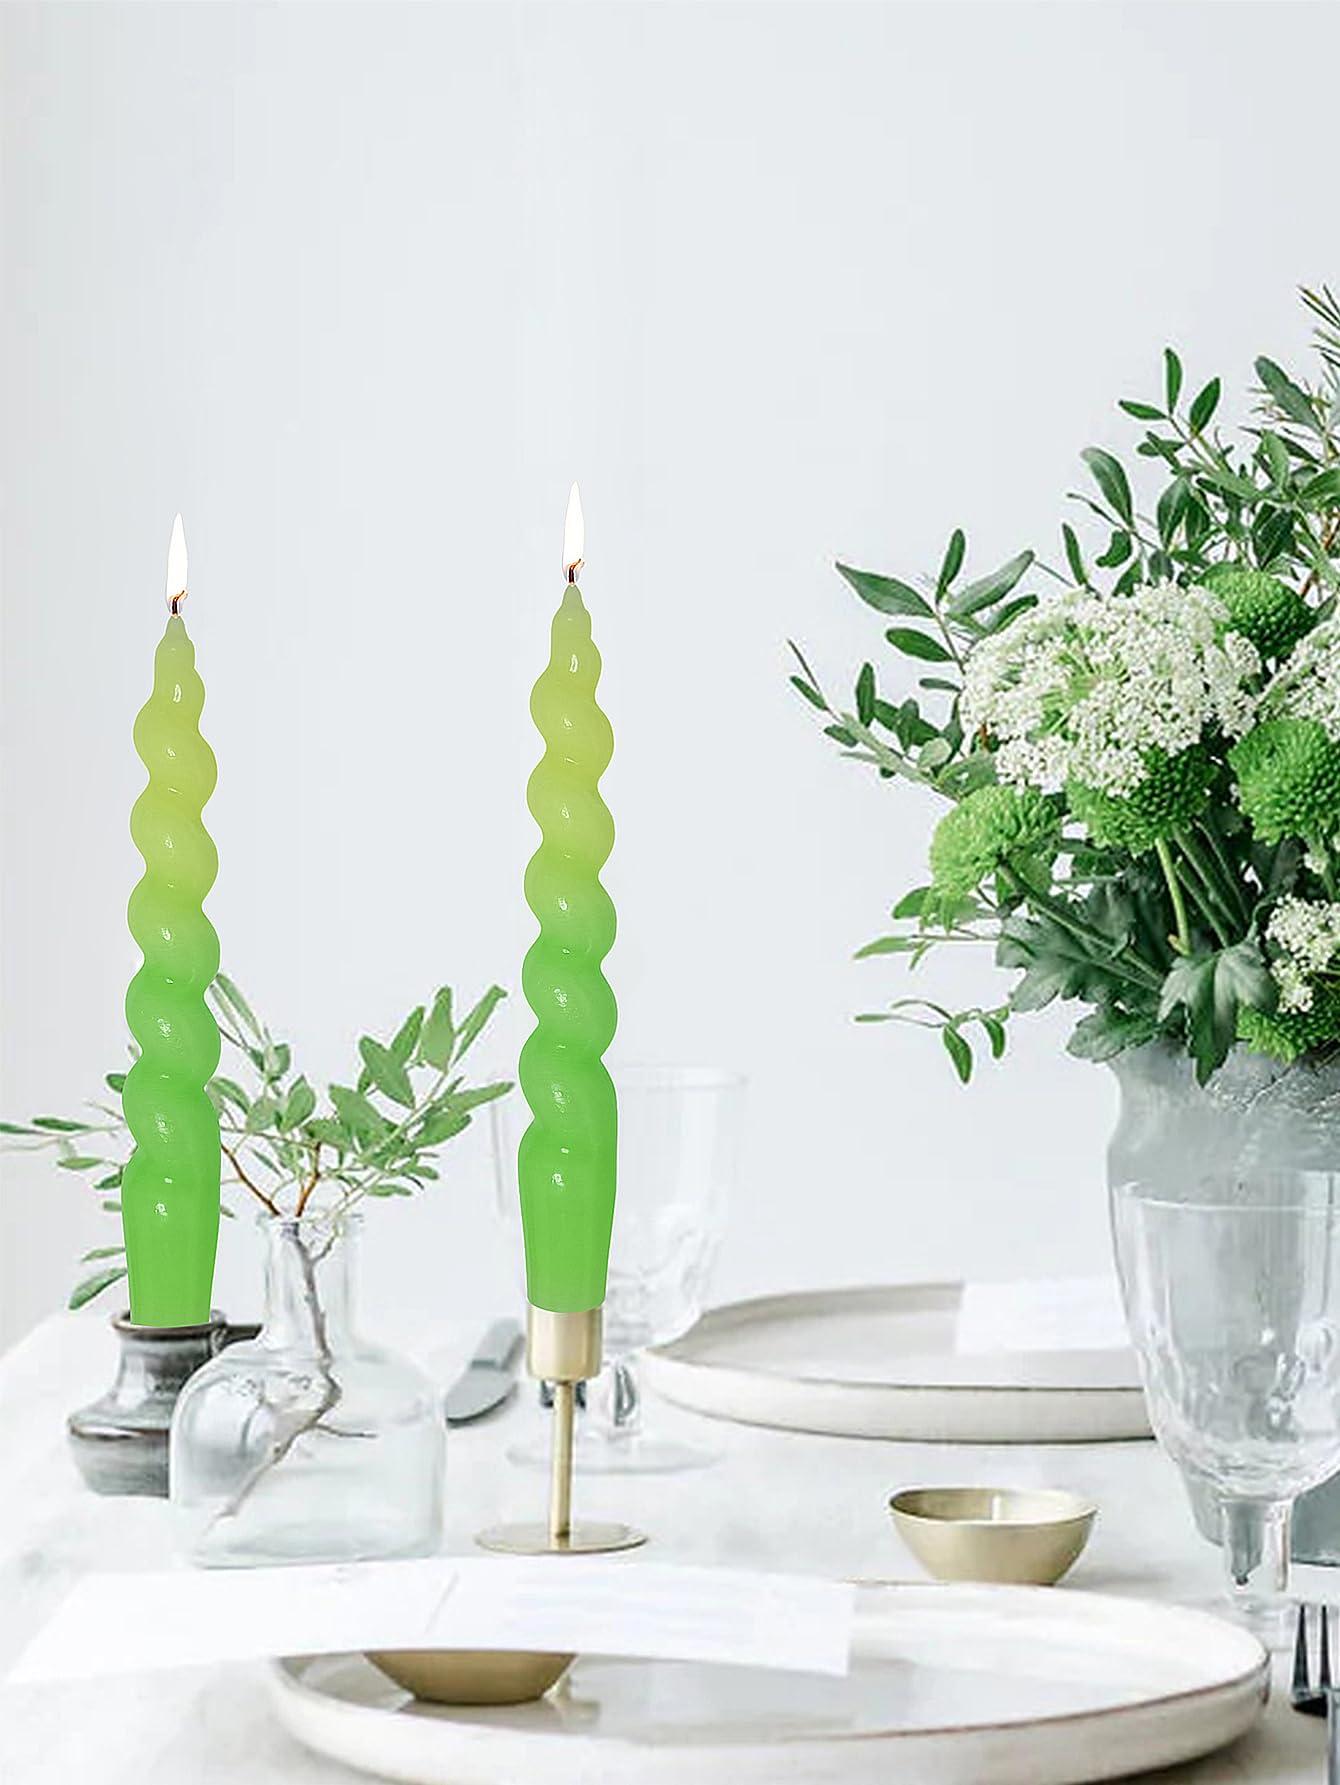 Gedengni 10inches Spiral Taper Candles Yellow Green Candlesticks Twisted Tapered Candles - 2PCS Unscented Candles for Wedding Dinner Party Decoration 1